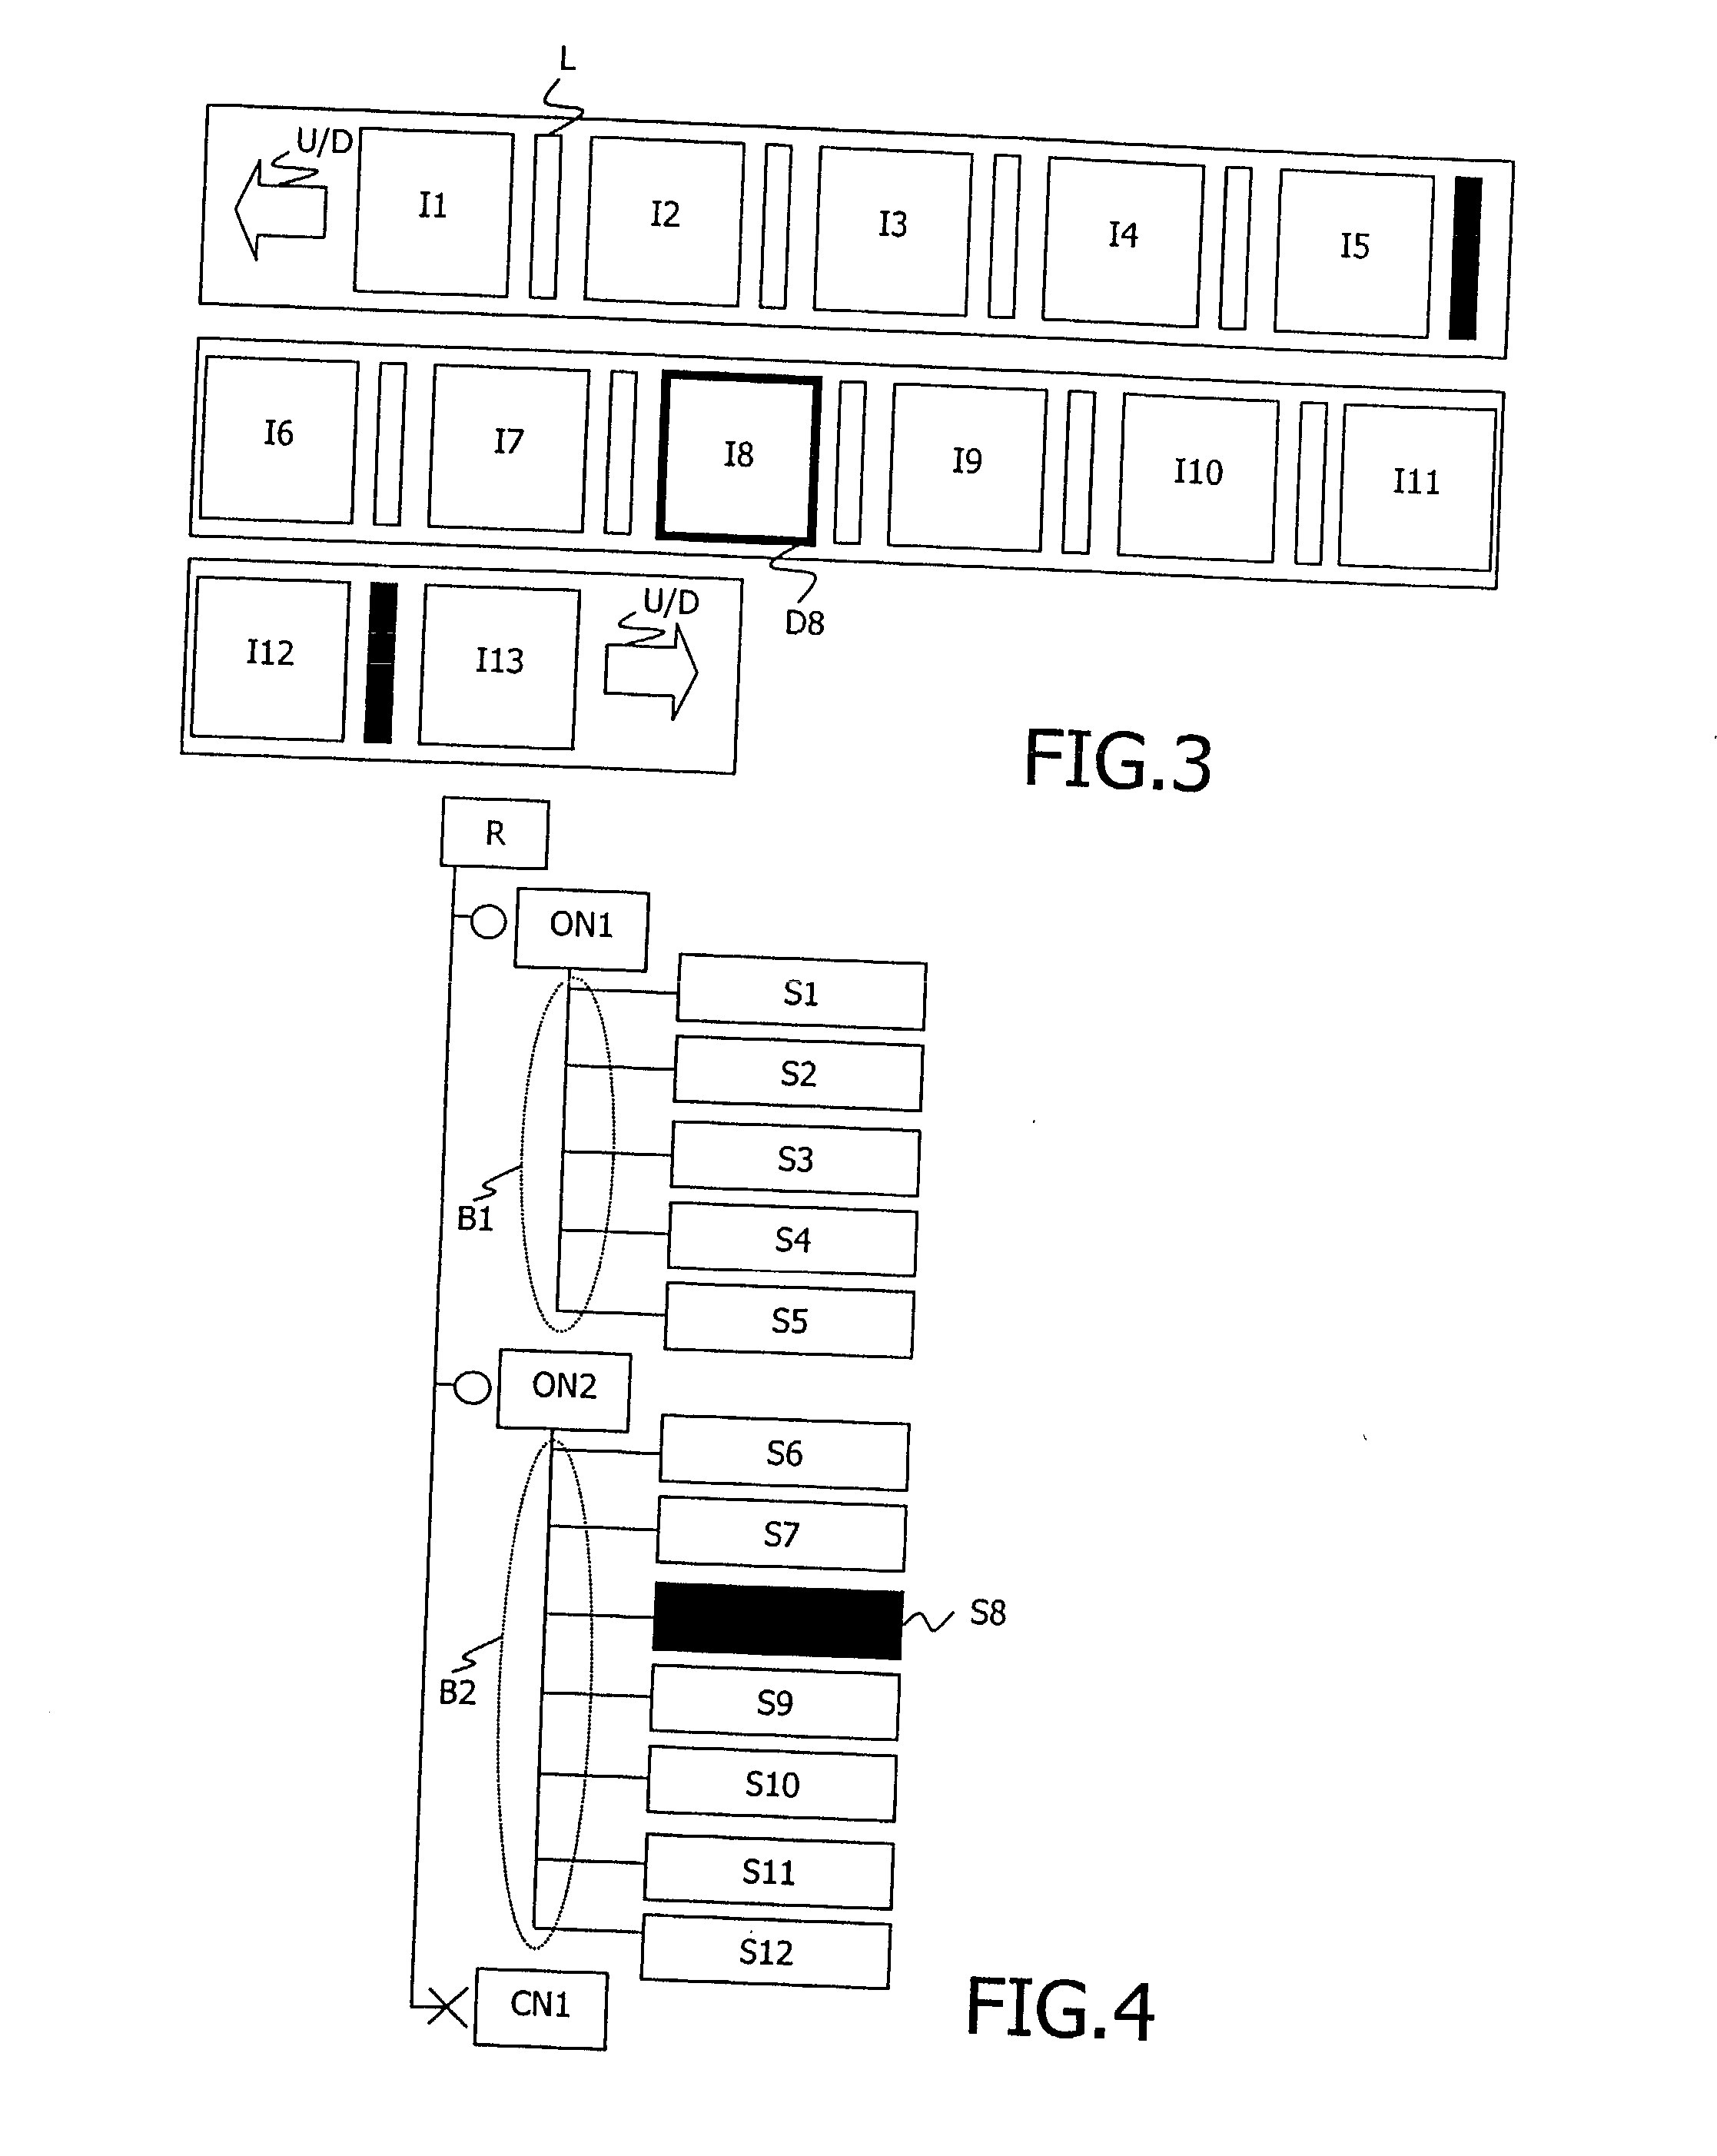 Generation of a description in a markup language of a structure of a multimedia content